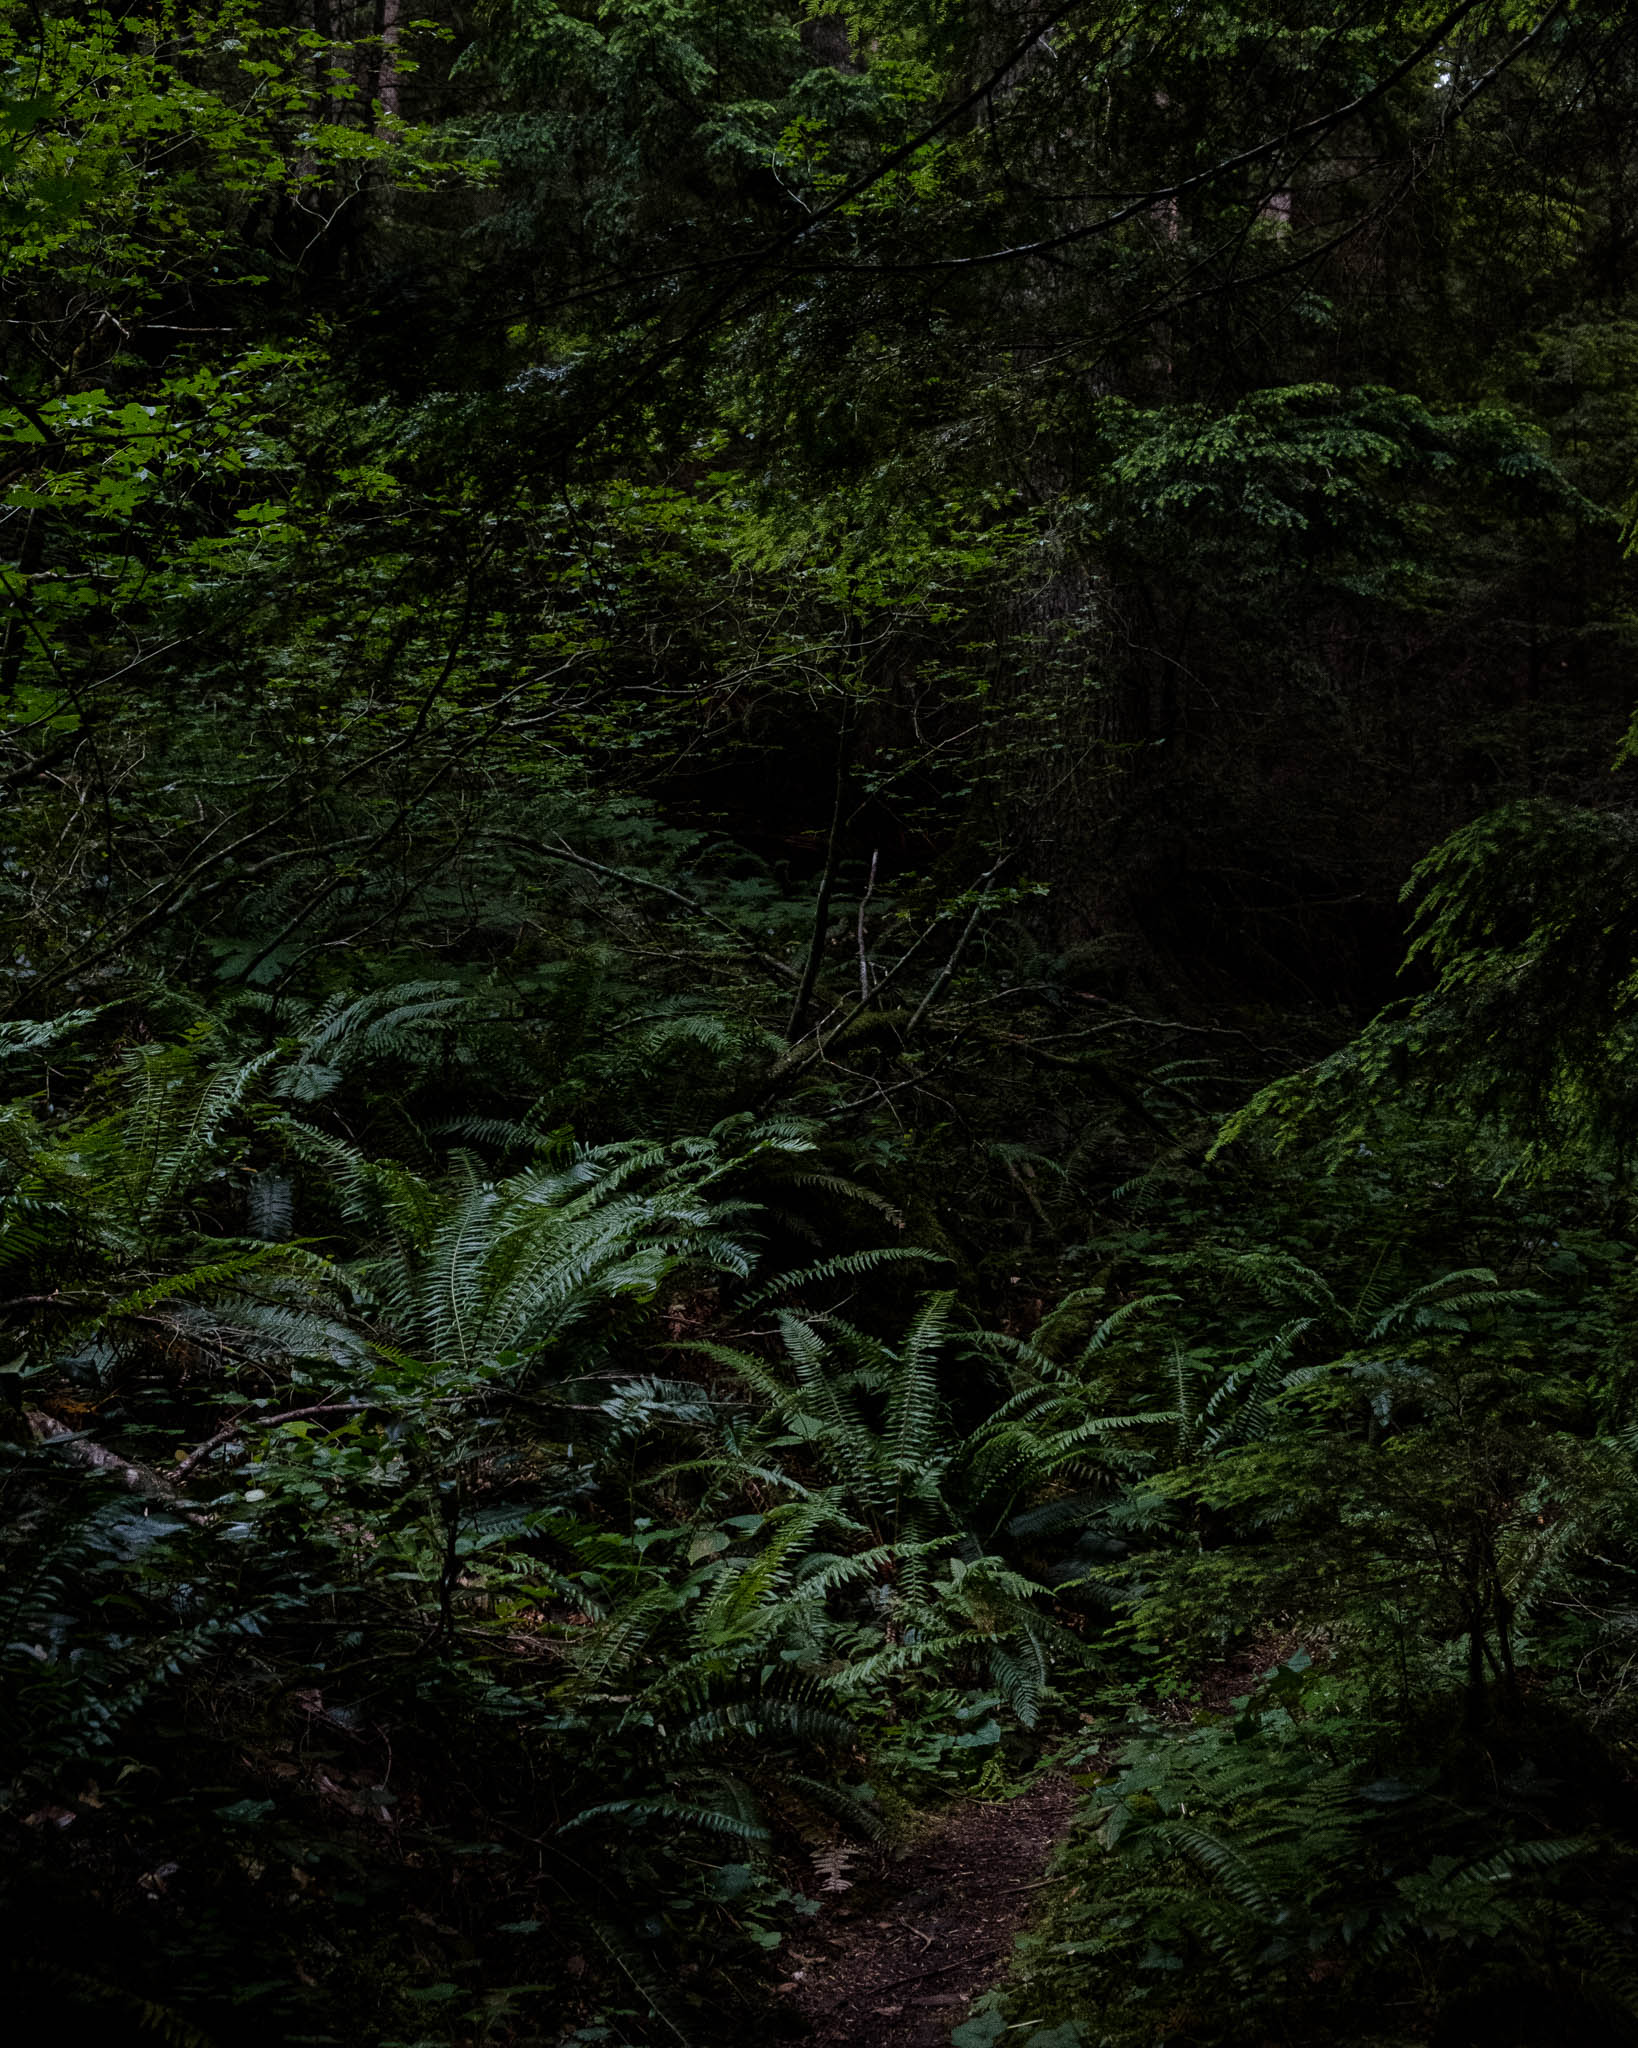 A soft trail winds its way through sword ferns as the last light of the evening fades.